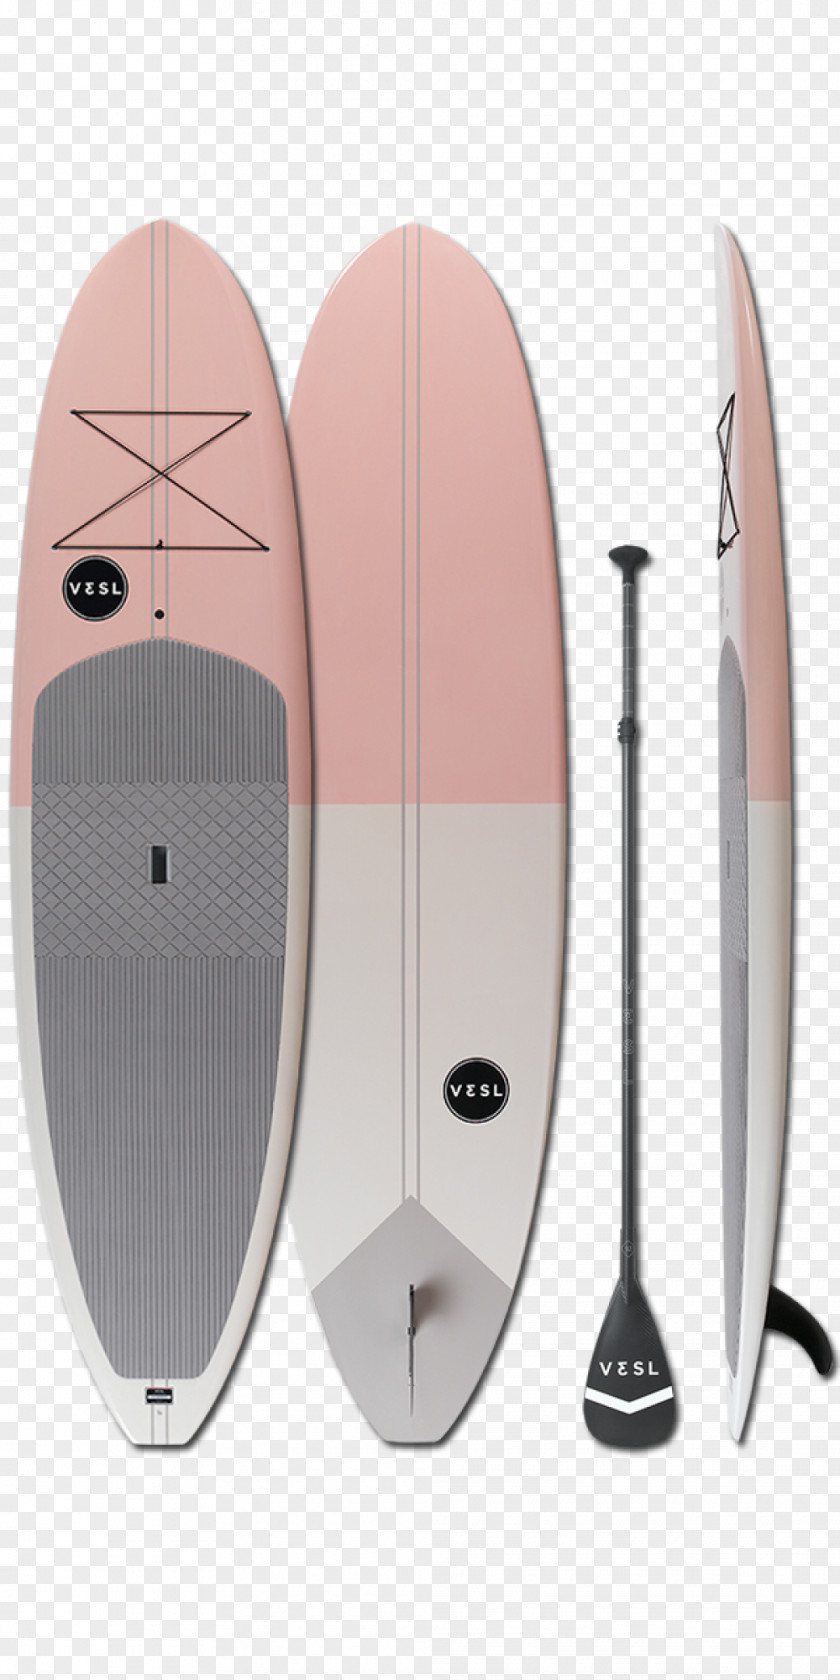 Paddle Board Surfboard Standup Paddleboarding Surfing Sporting Goods PNG